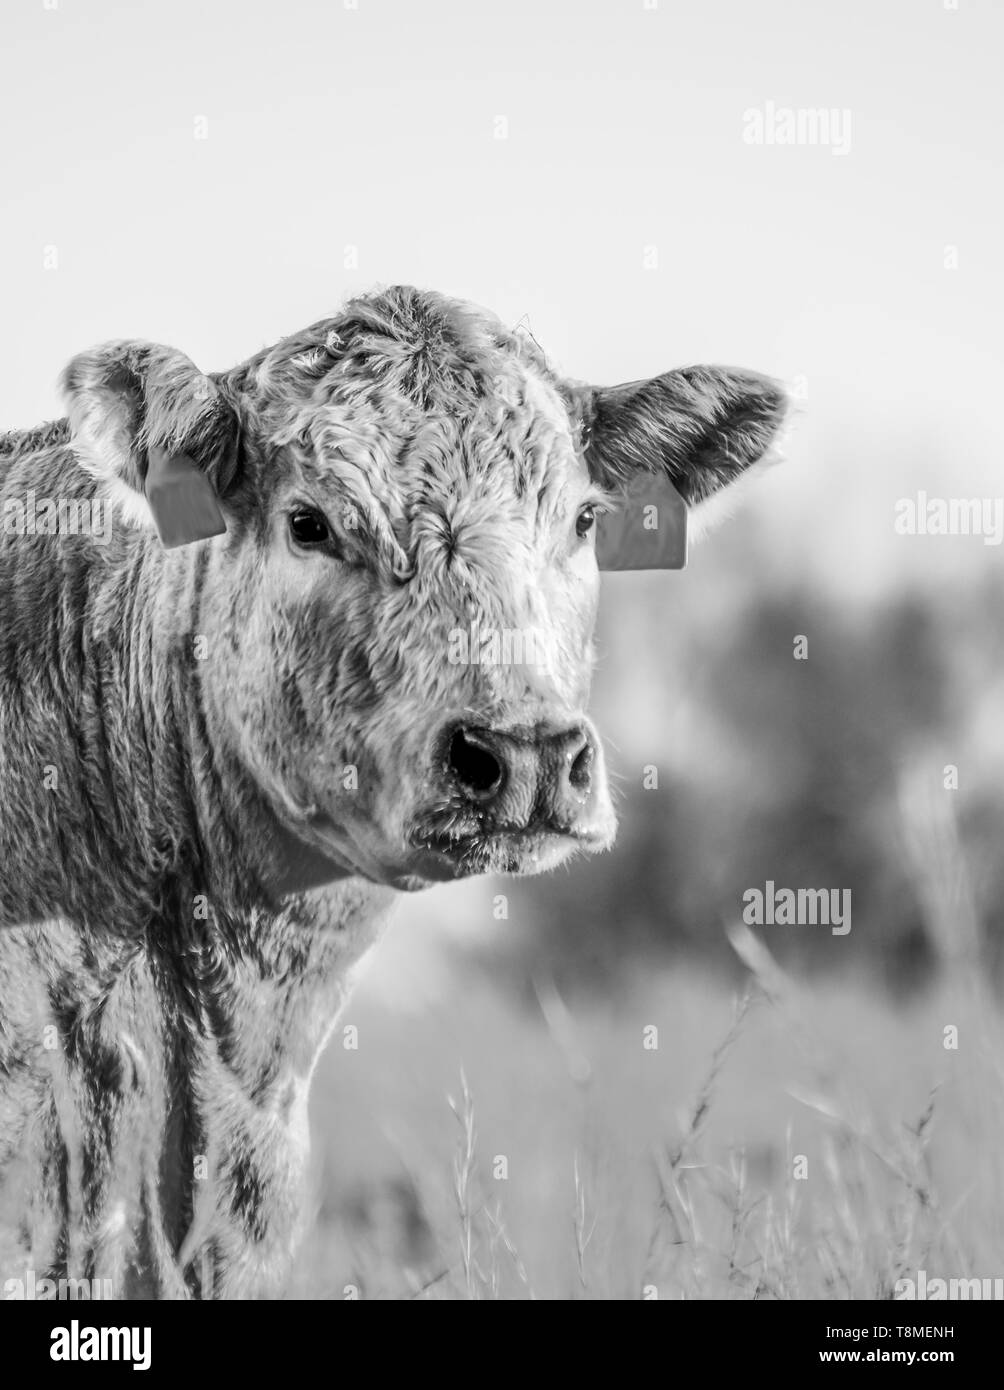 Portrait of a Charolais beef cow head and neck with blurred background and negative space above Stock Photo